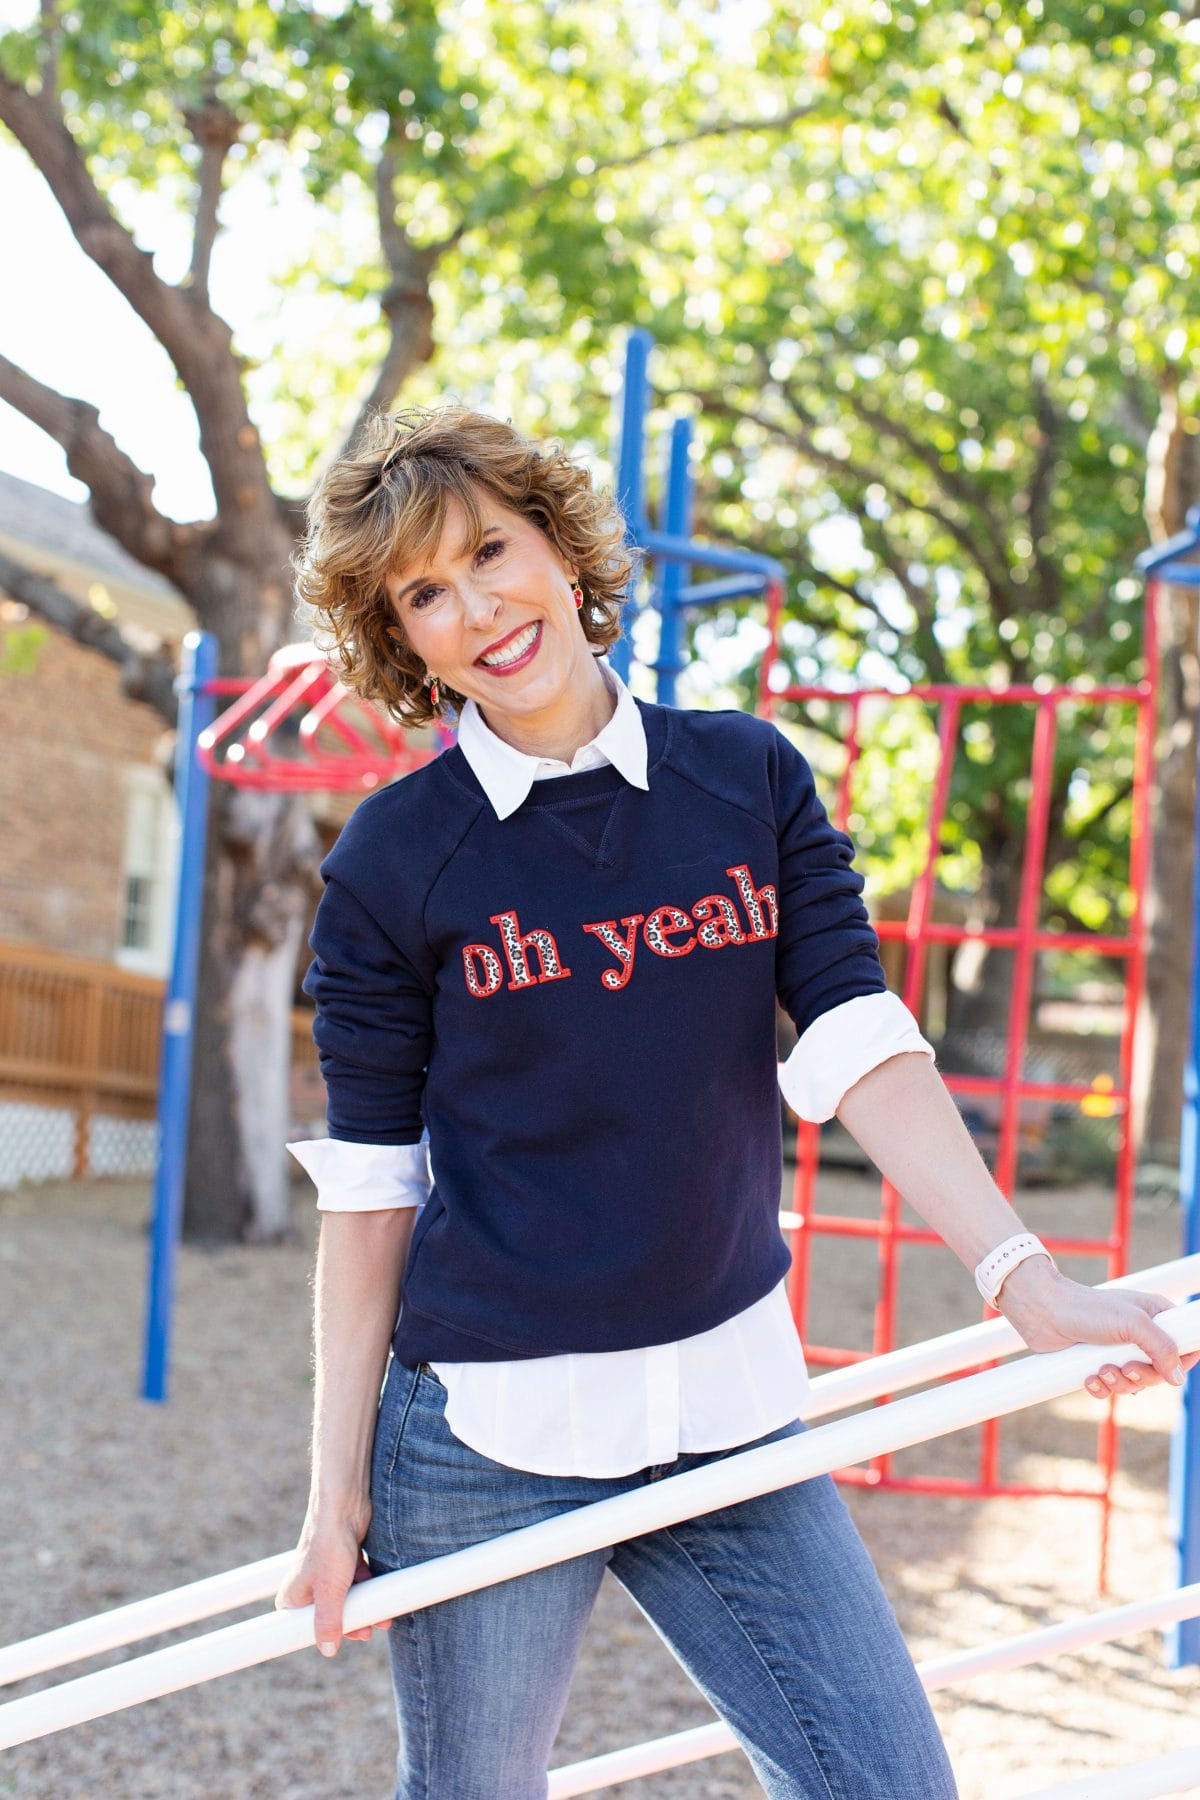 woman wearing blue sweatshirt that says "oh, yeah" in leopard print letters